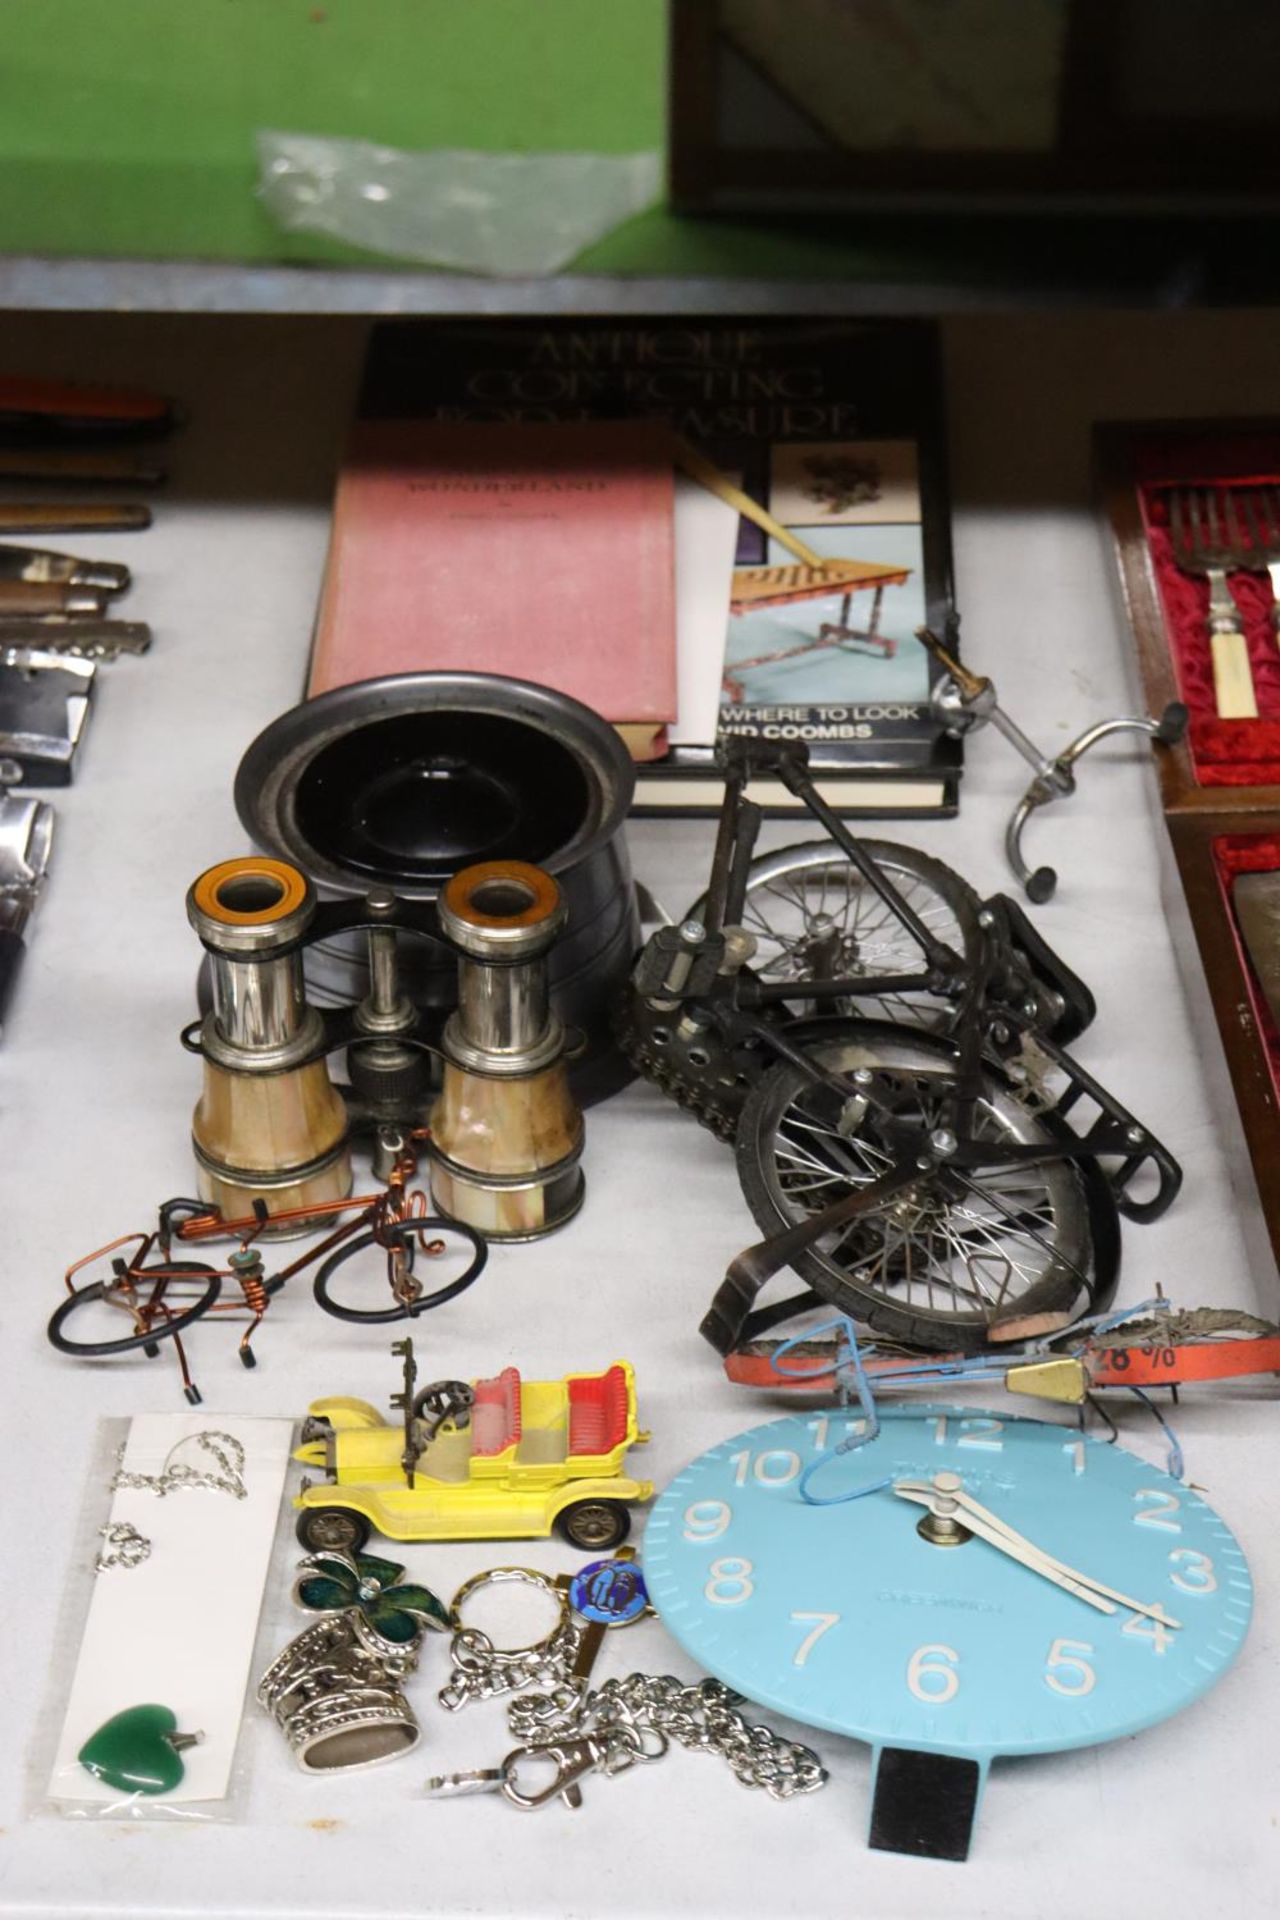 AMIXED LOT TO INCLUDE A LARGE PEWTER INKWELL, BINOCULARS, BOOKS, A CLOCK, BIKE ORNAMENTS, ETC